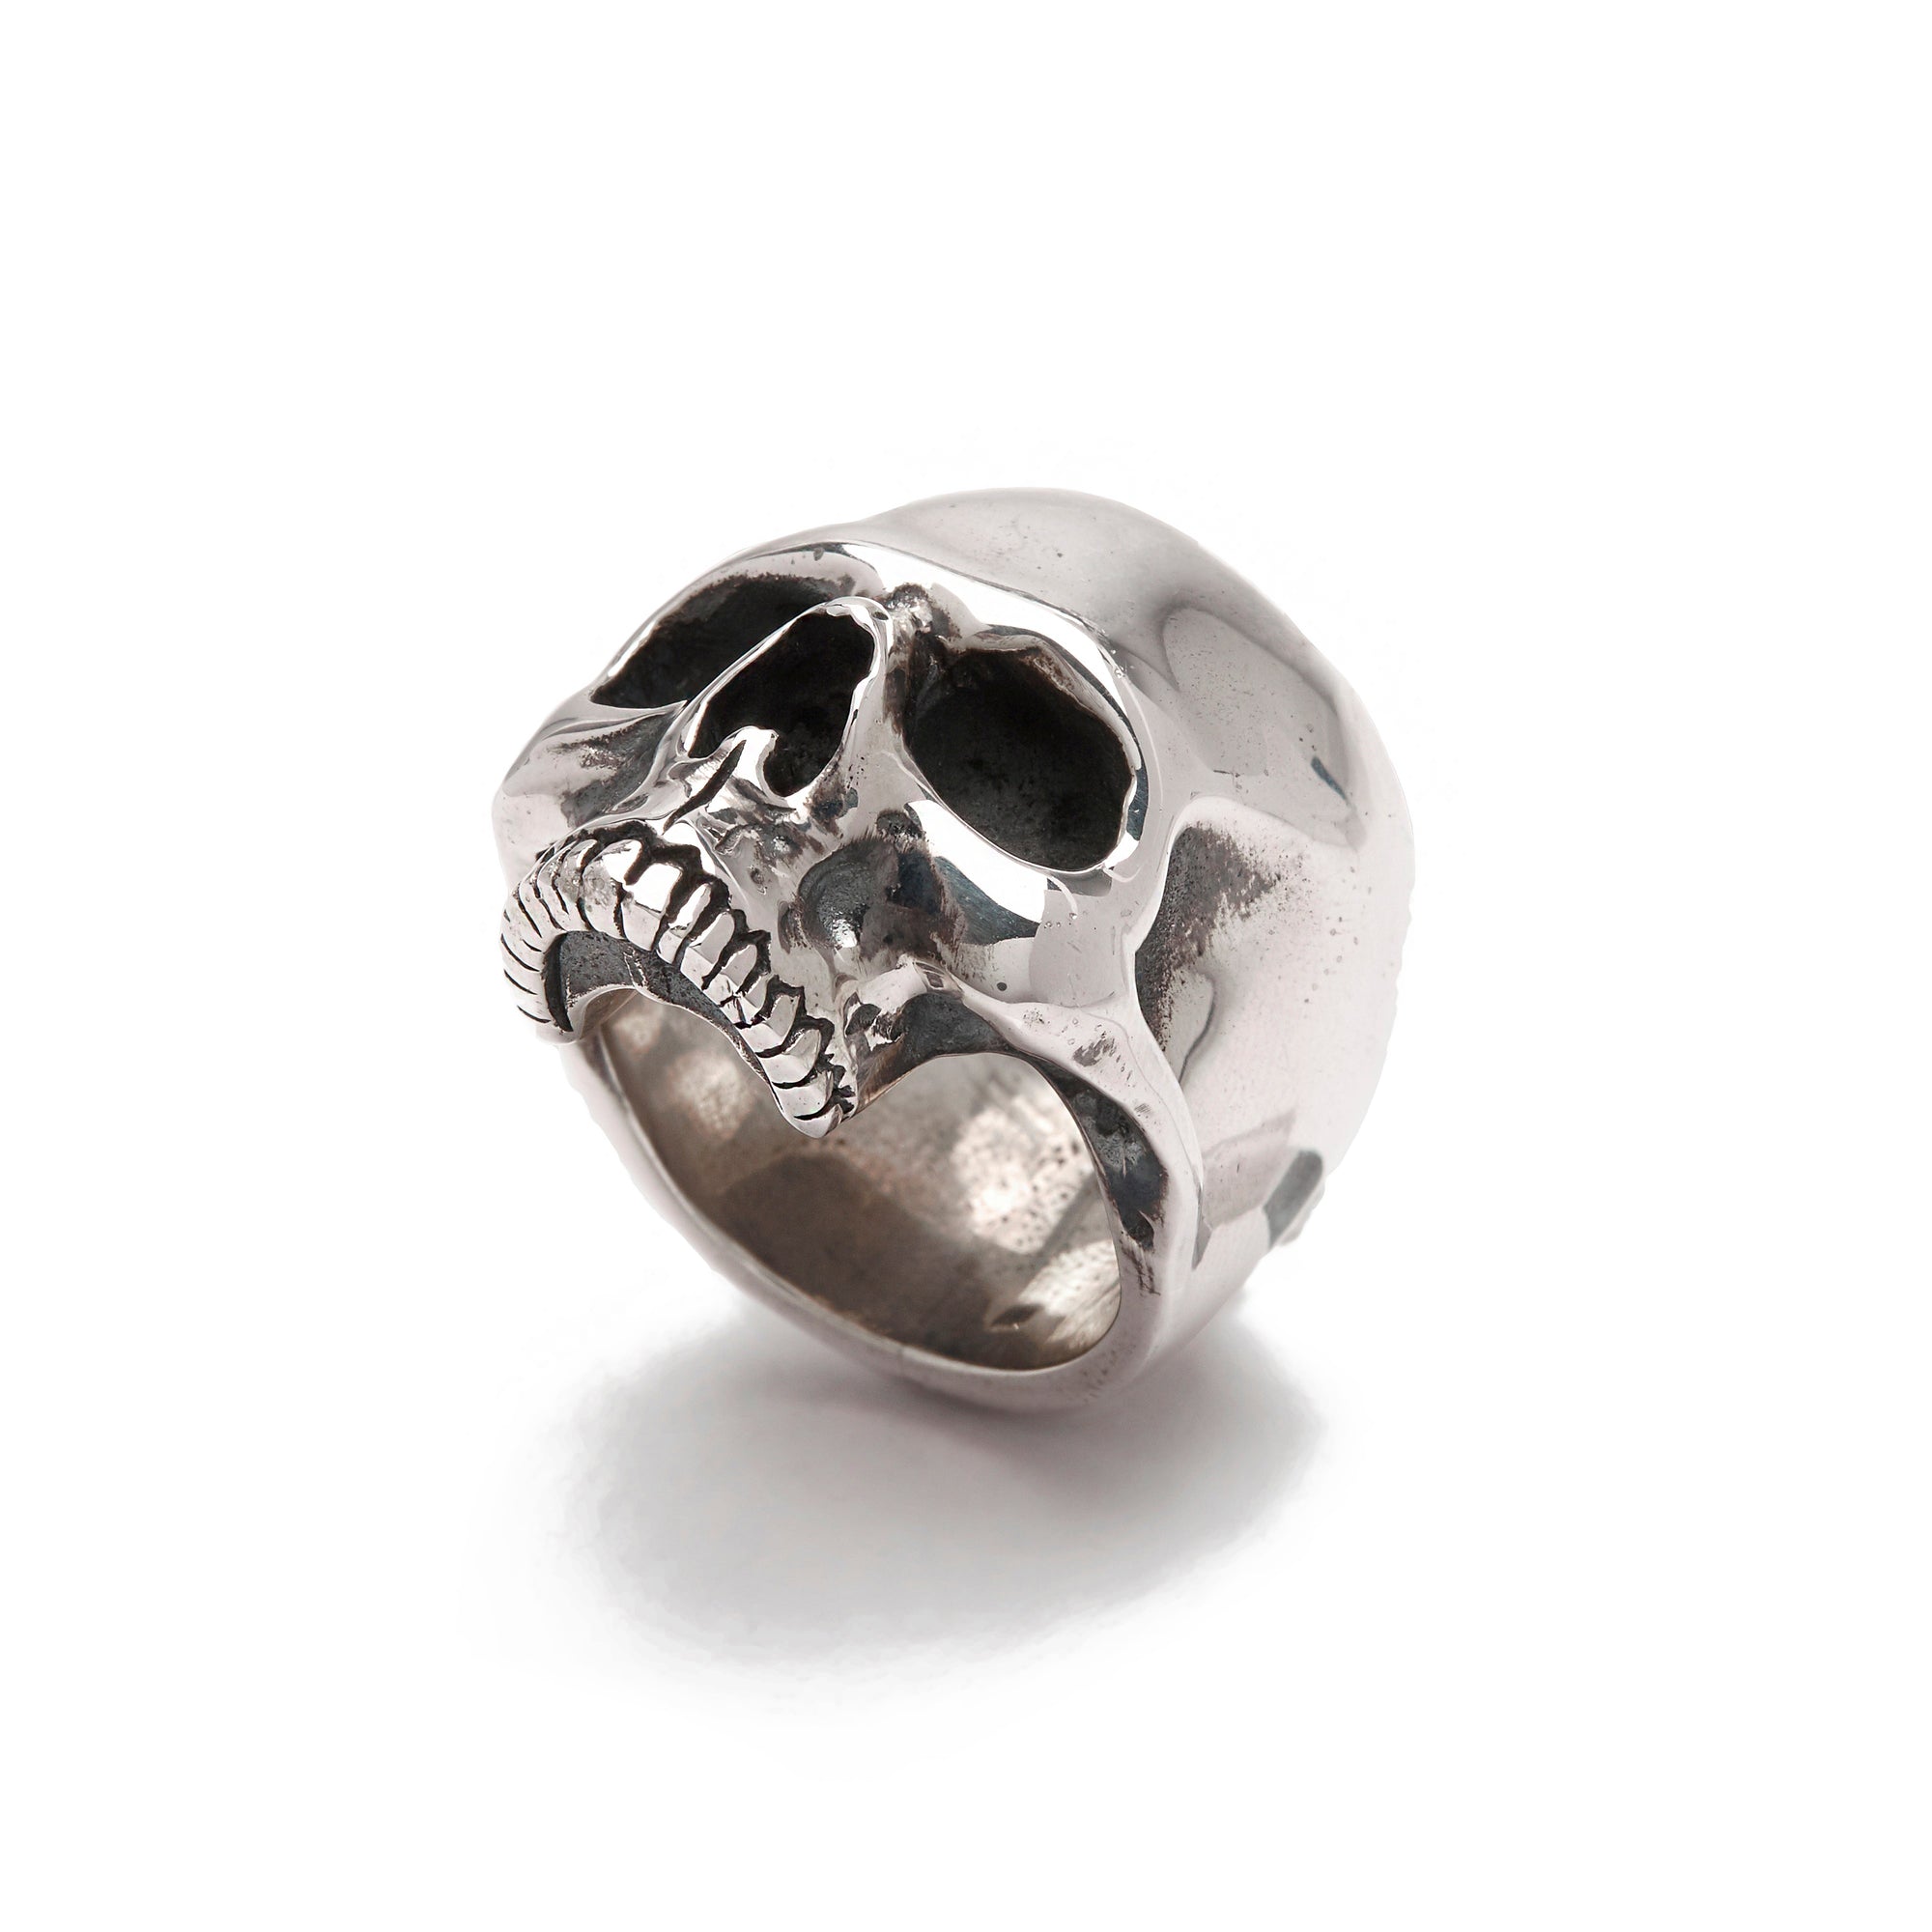 The Great Frog - Jawless Anatomical Skull Ring view 2